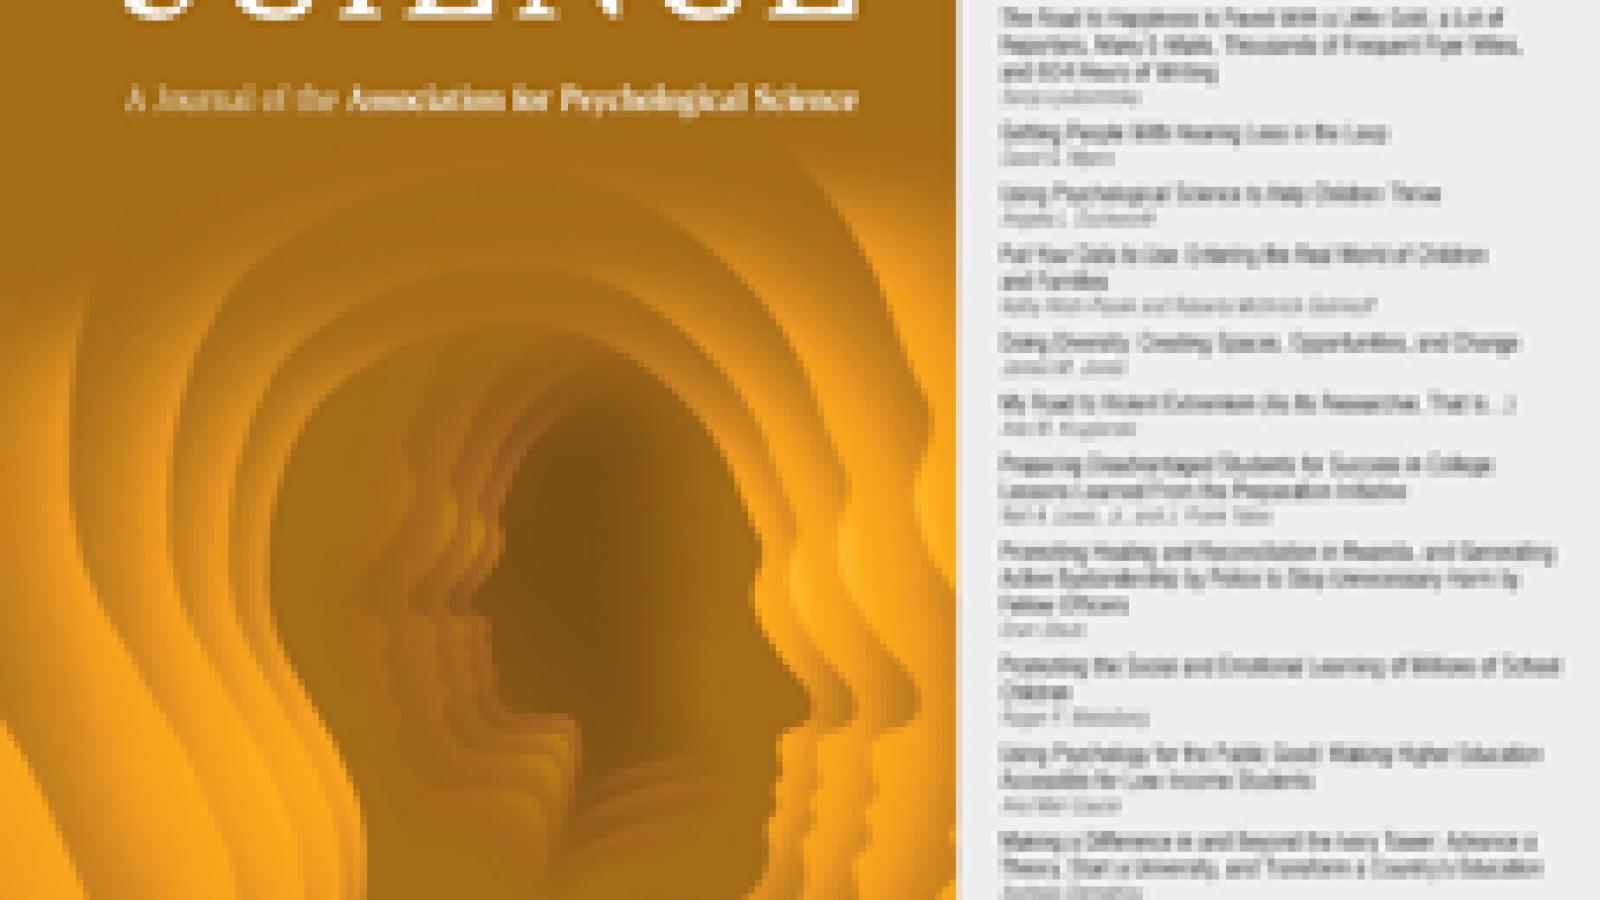 Cover of Journal with Orange Profile of Human Head